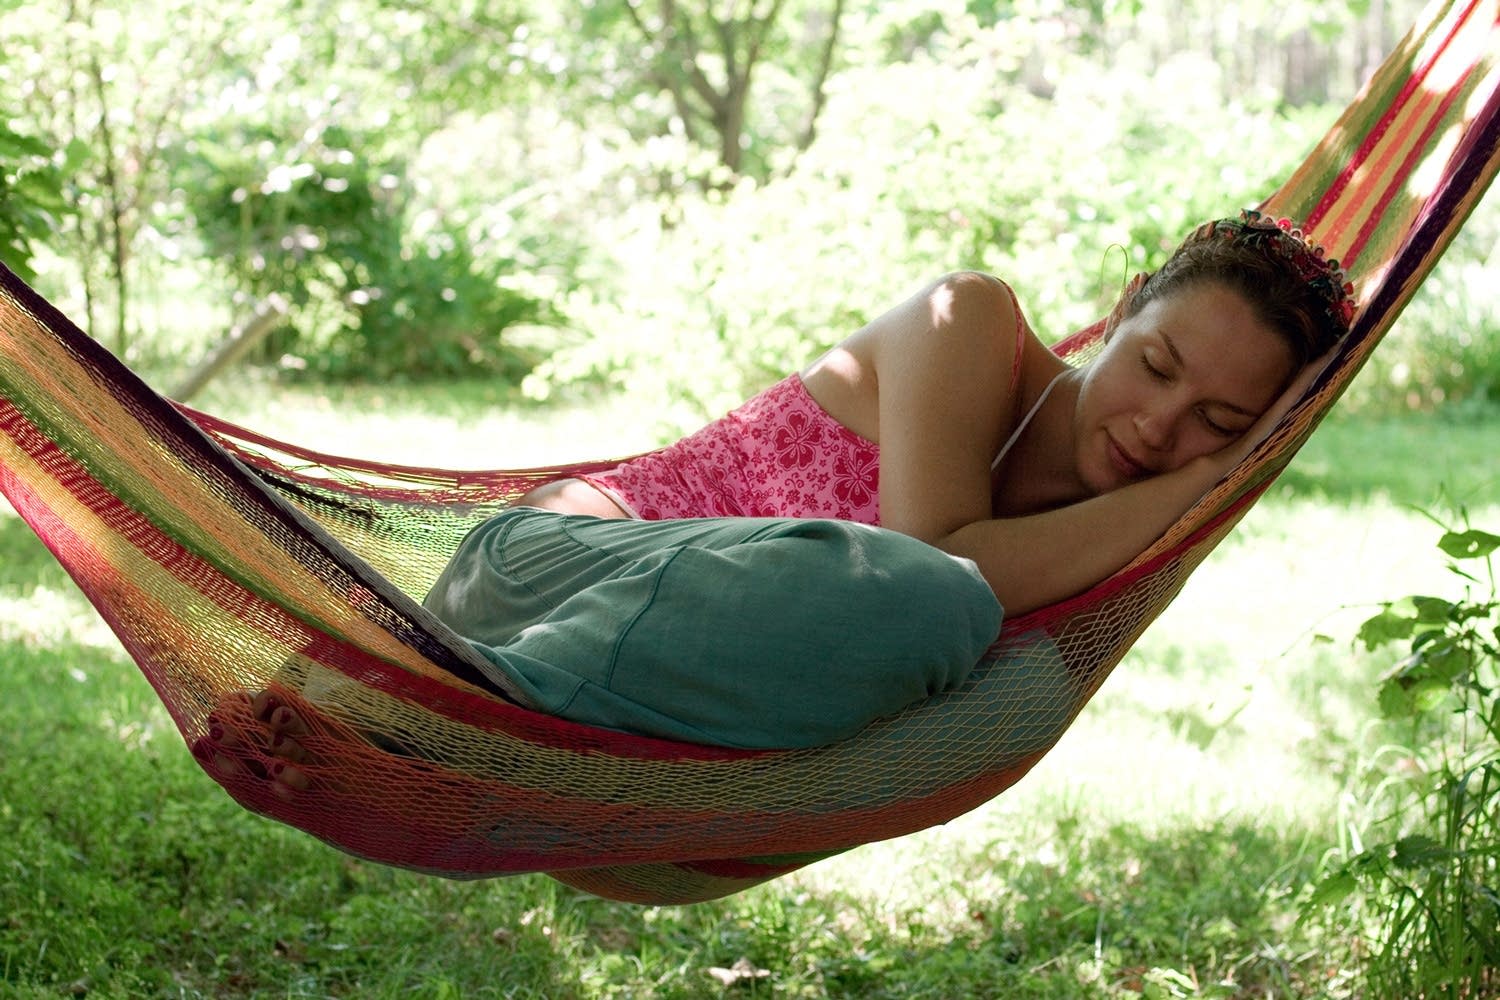 How To Relax In A Hammock